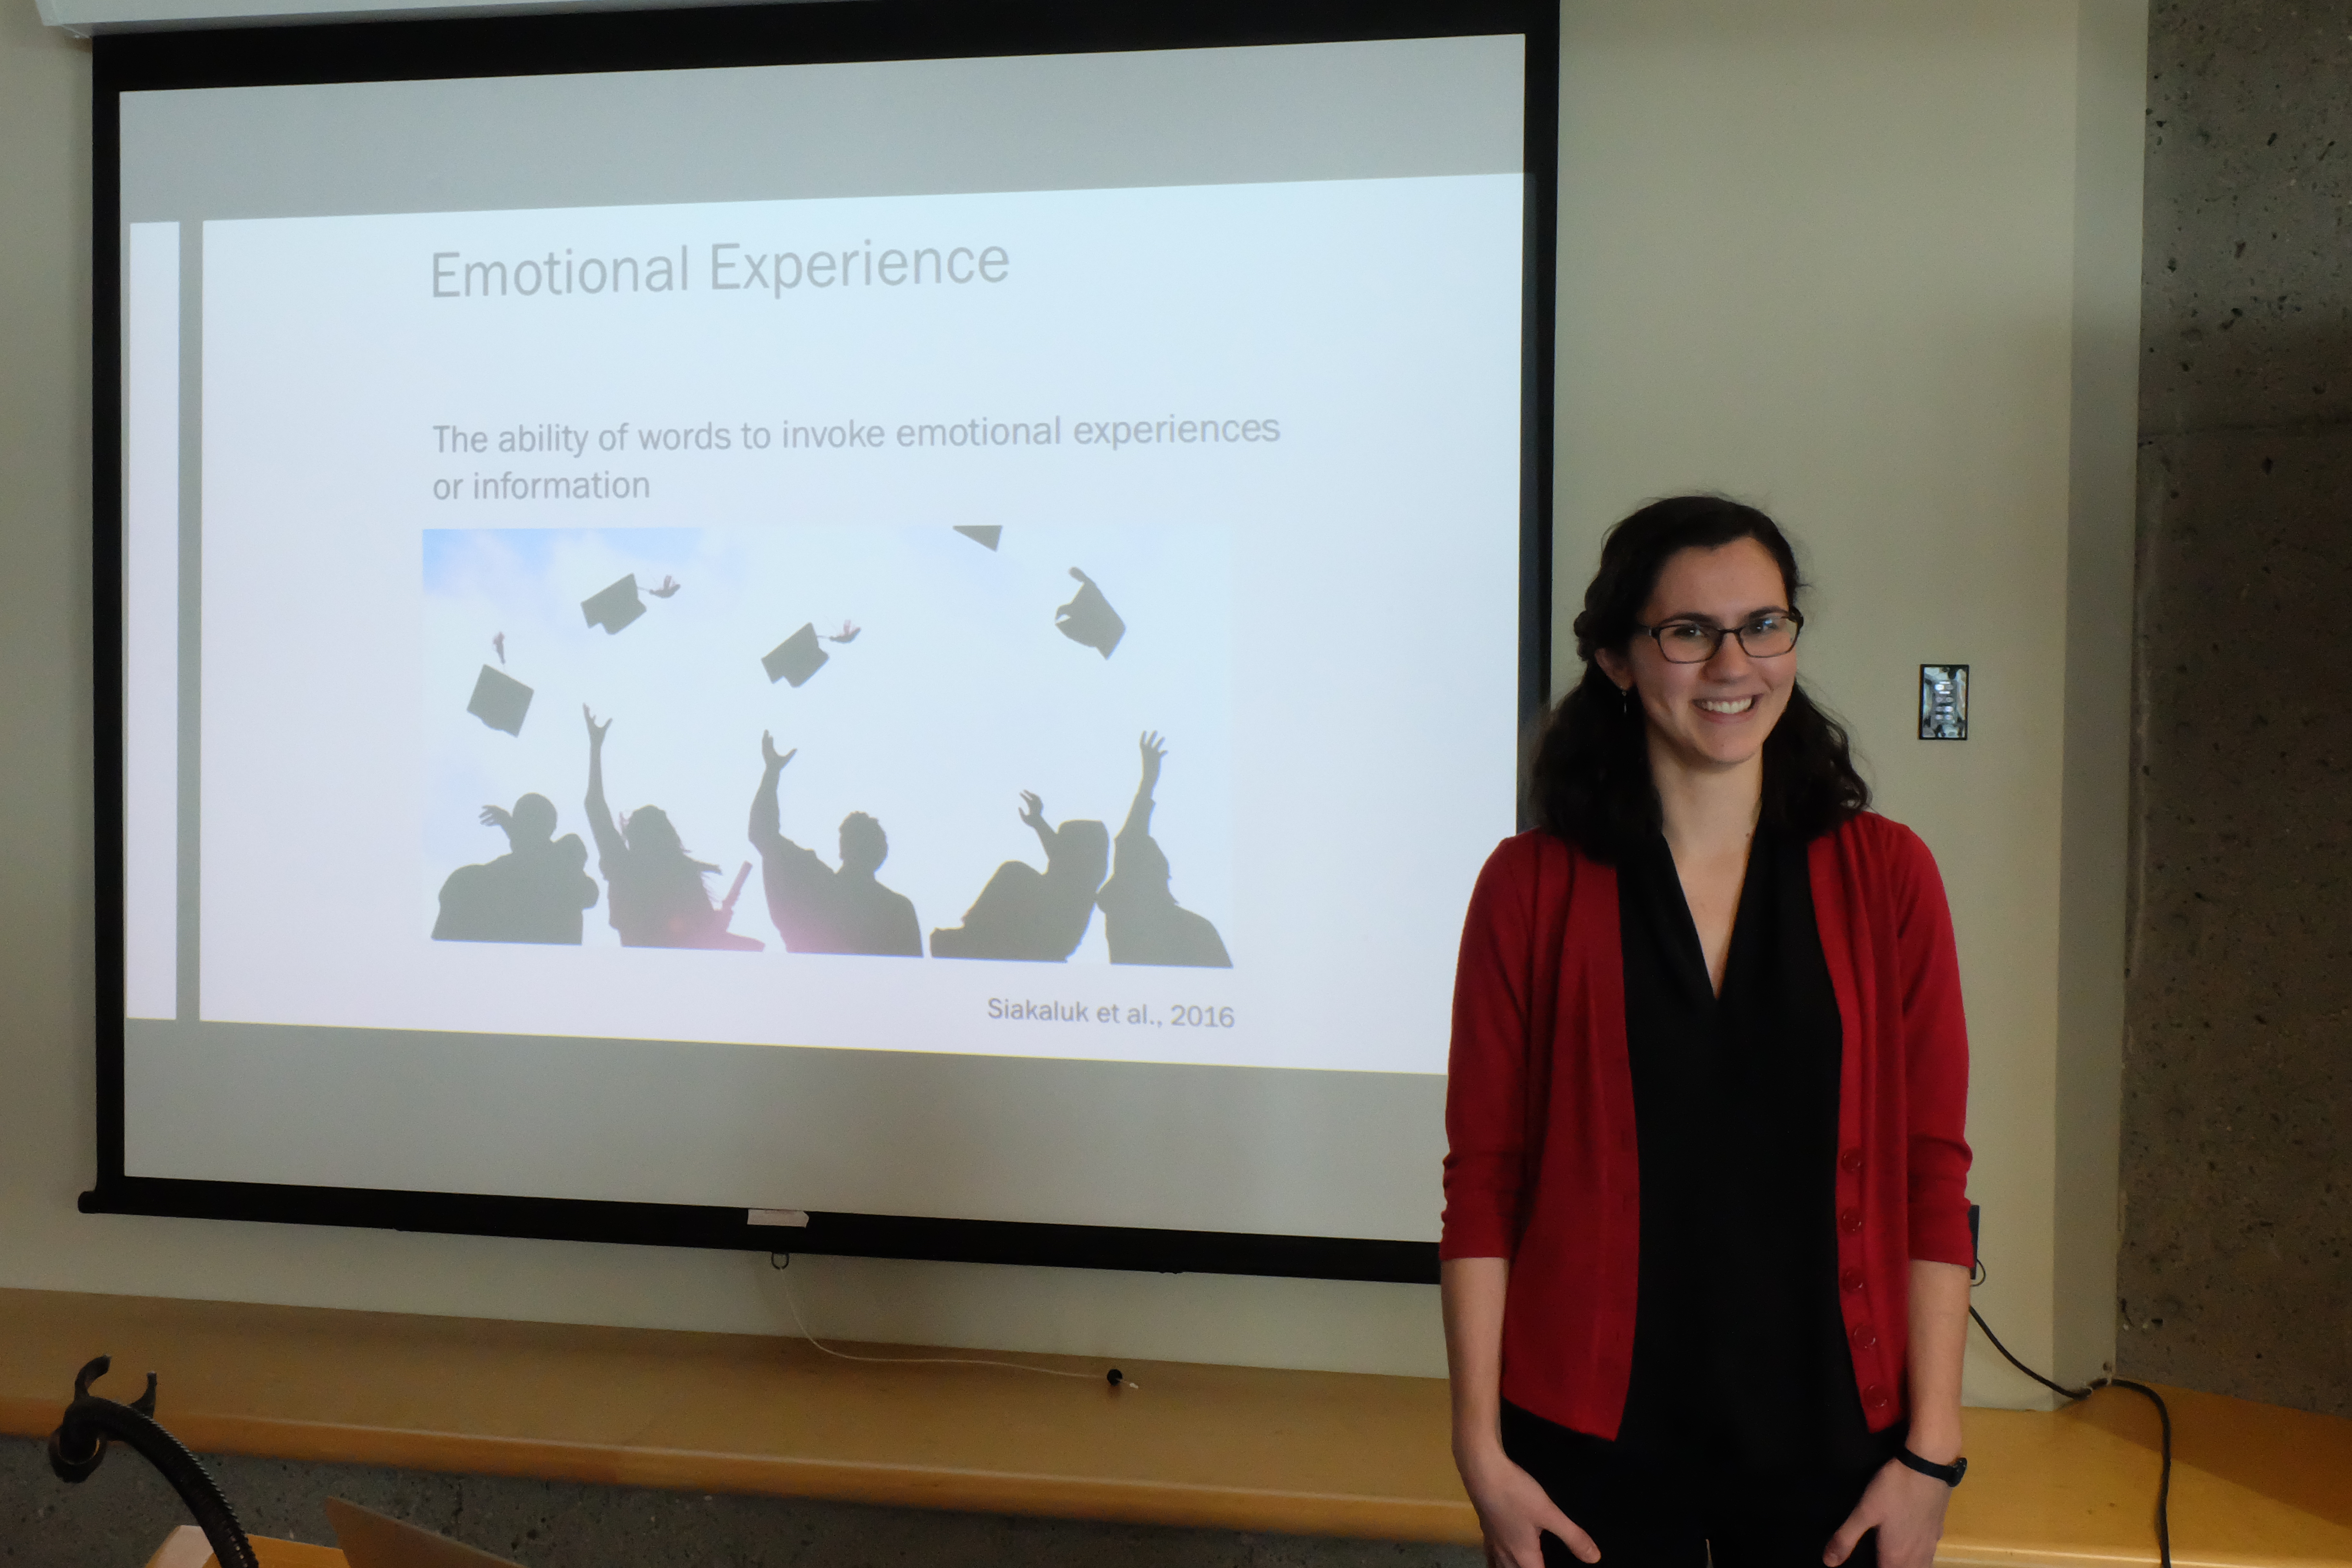 Annie Bourque: "Emotionality effects in semantic categorization"